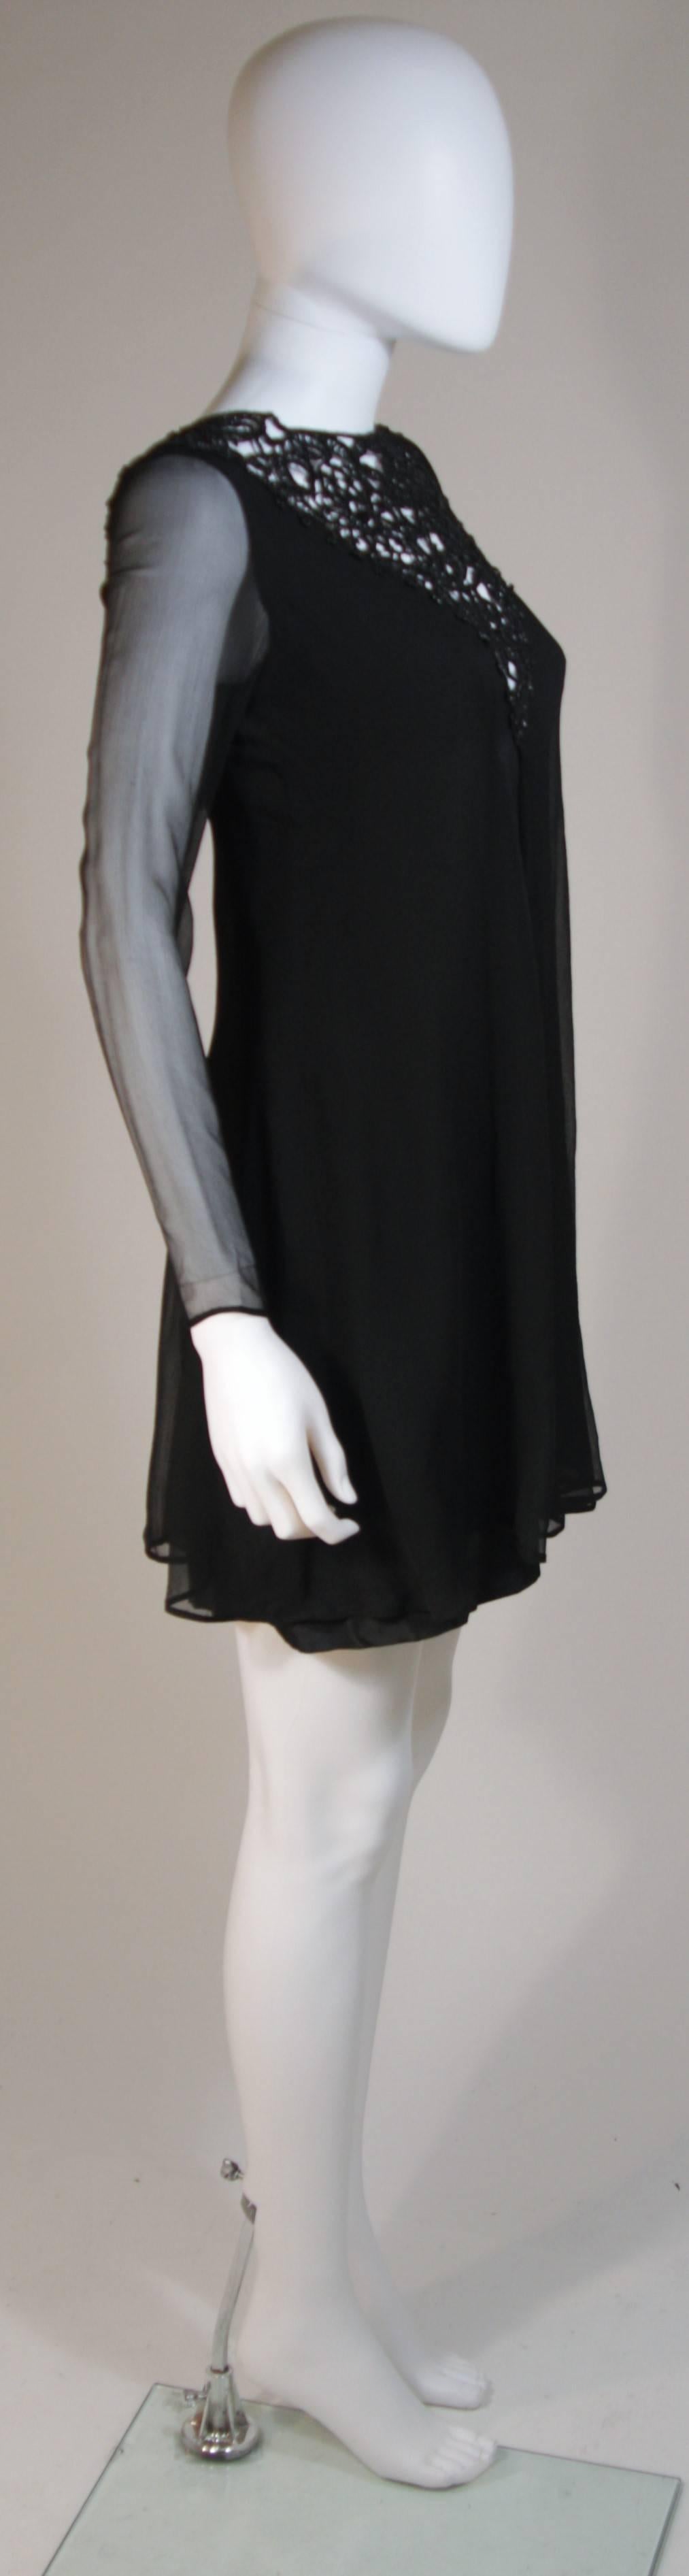 Cutstom Made 1960s Silk Chiffon Cocktail Dress with Beaded Neckline Size 2-4 For Sale 2